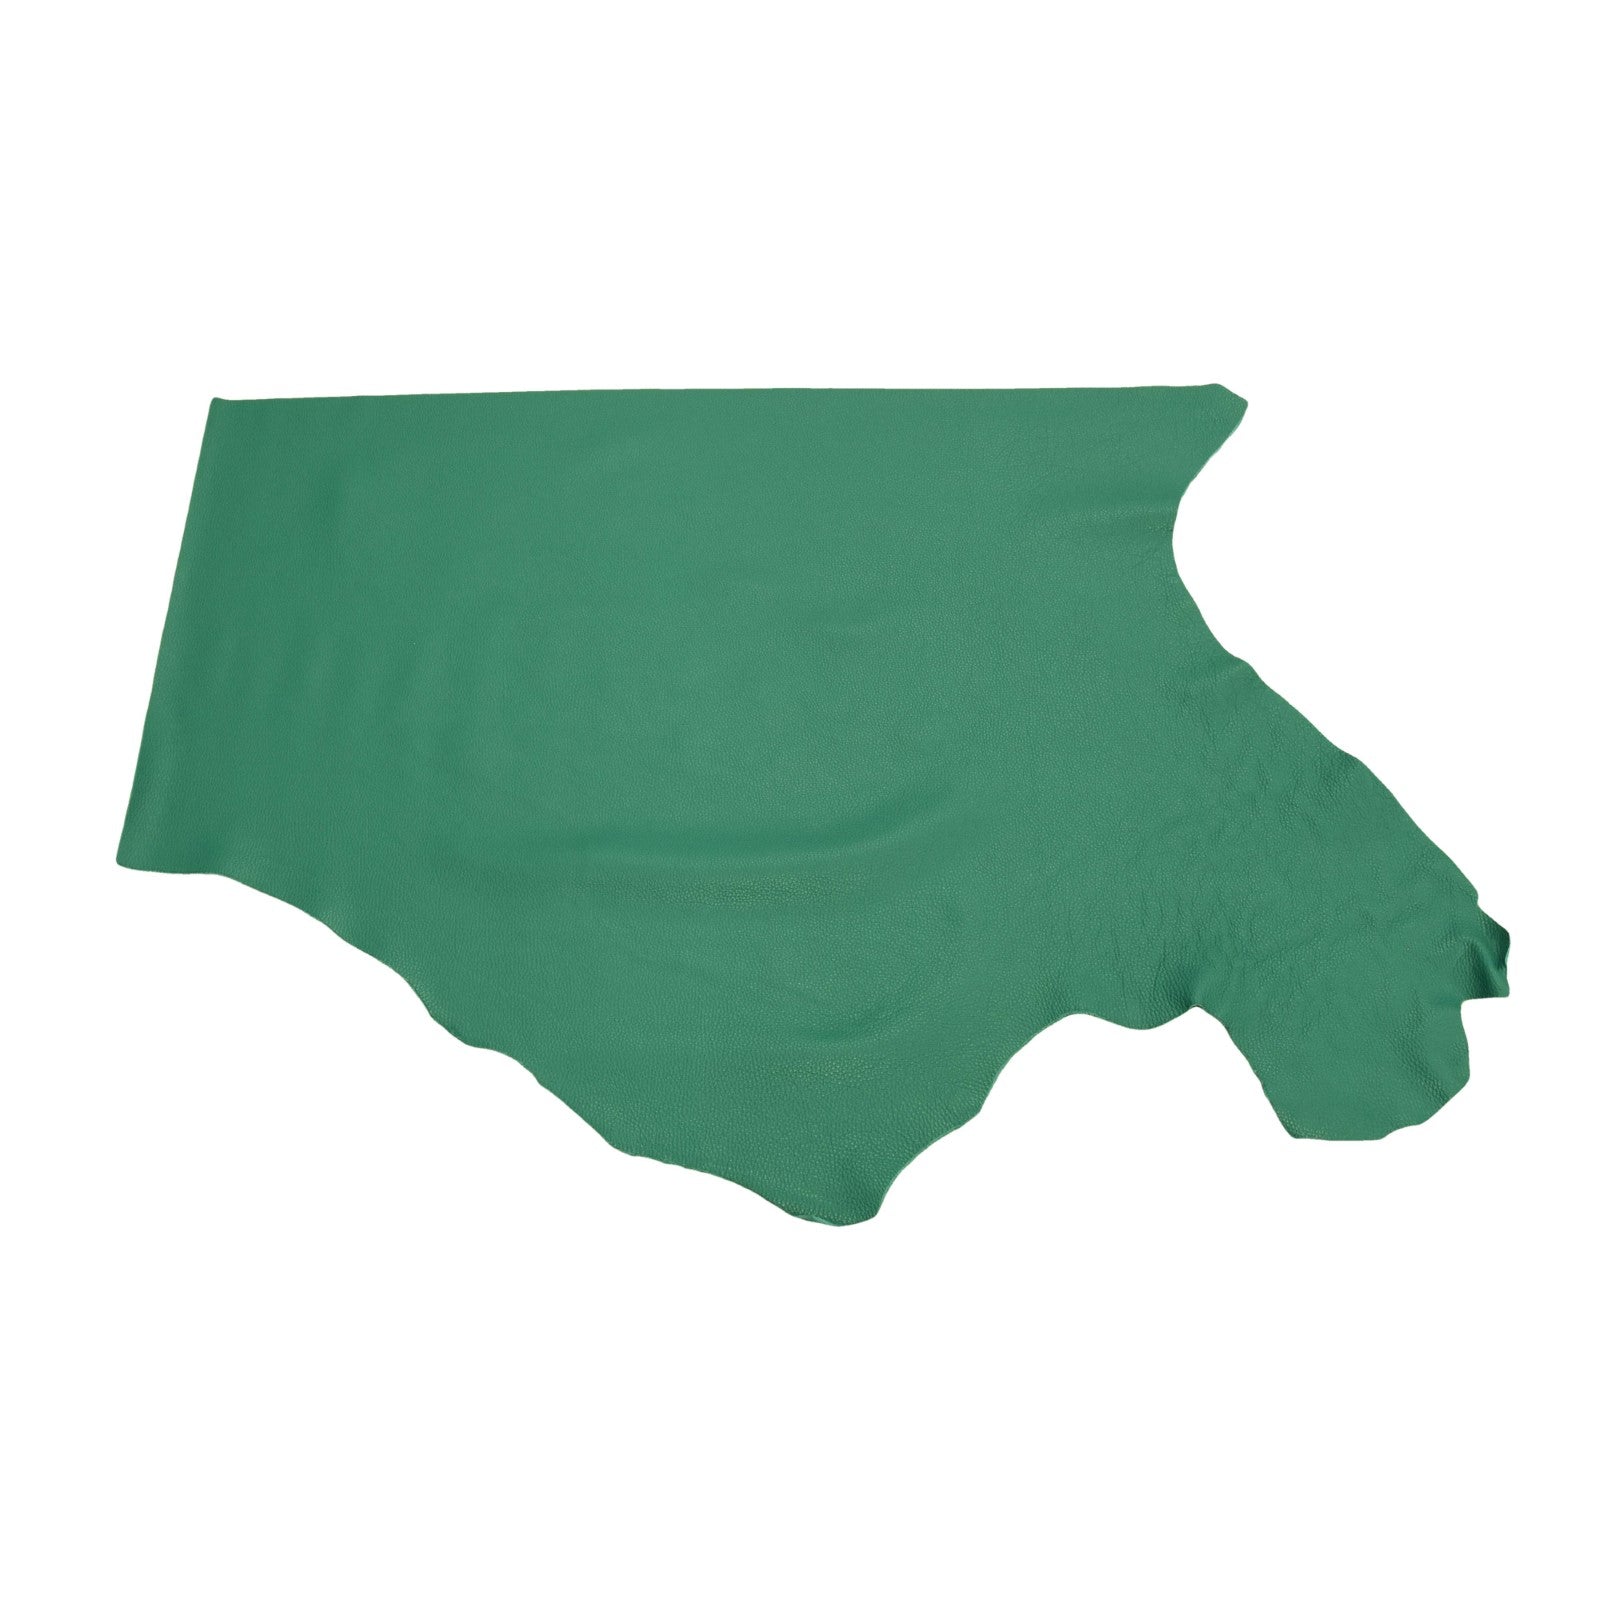 Deep Atlantic Ocean Green, 3-4 oz Cow Hides, Tried n True, Bottom Piece / 6.5-7.5 Square Foot | The Leather Guy